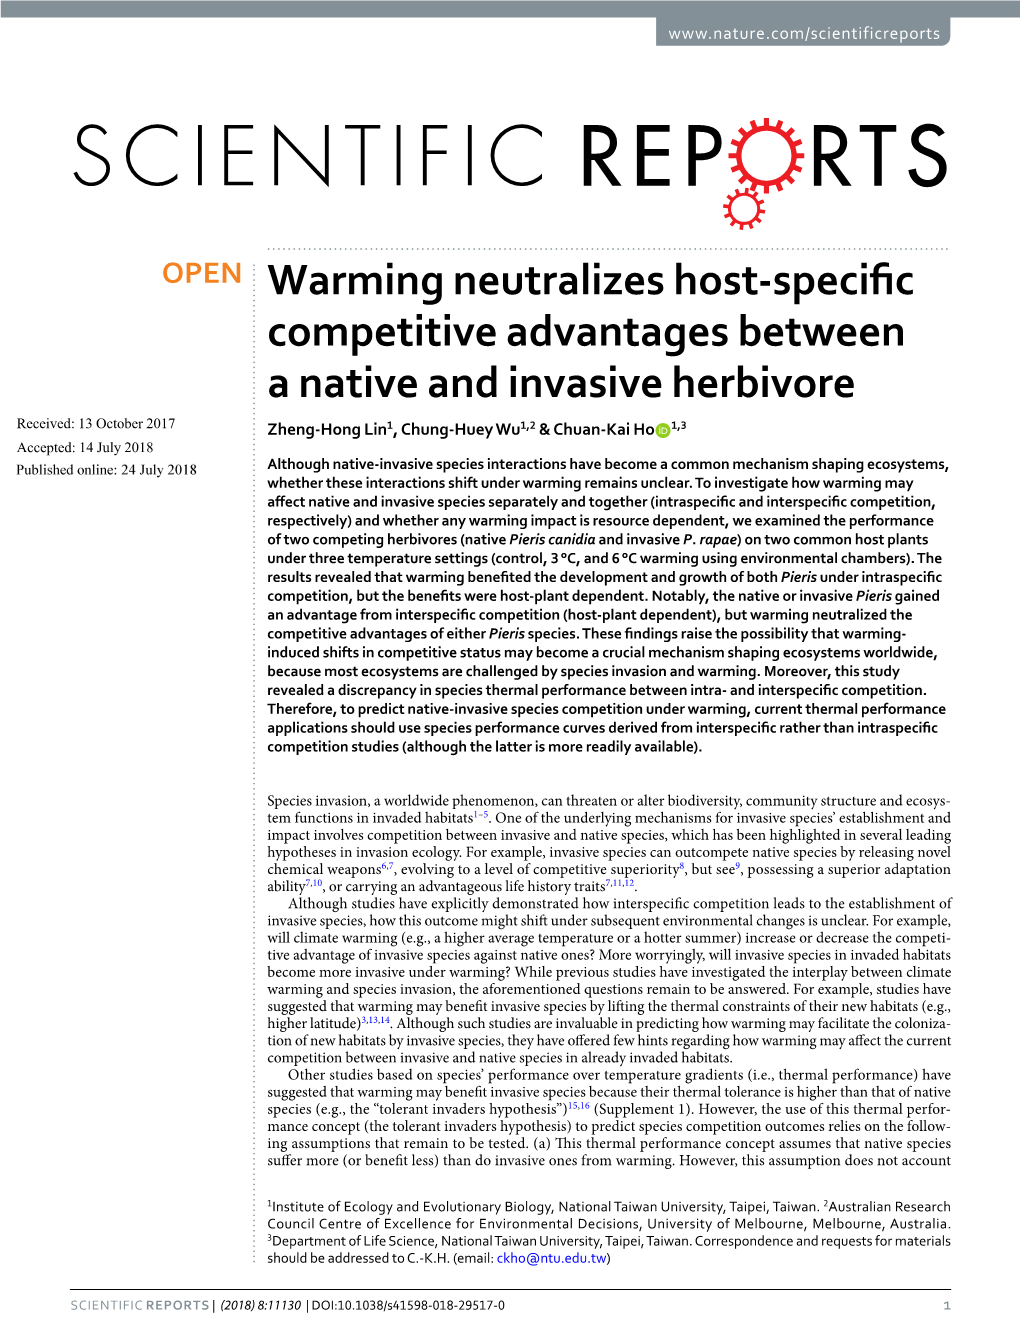 Warming Neutralizes Host-Specific Competitive Advantages Between a Native and Invasive Herbivore